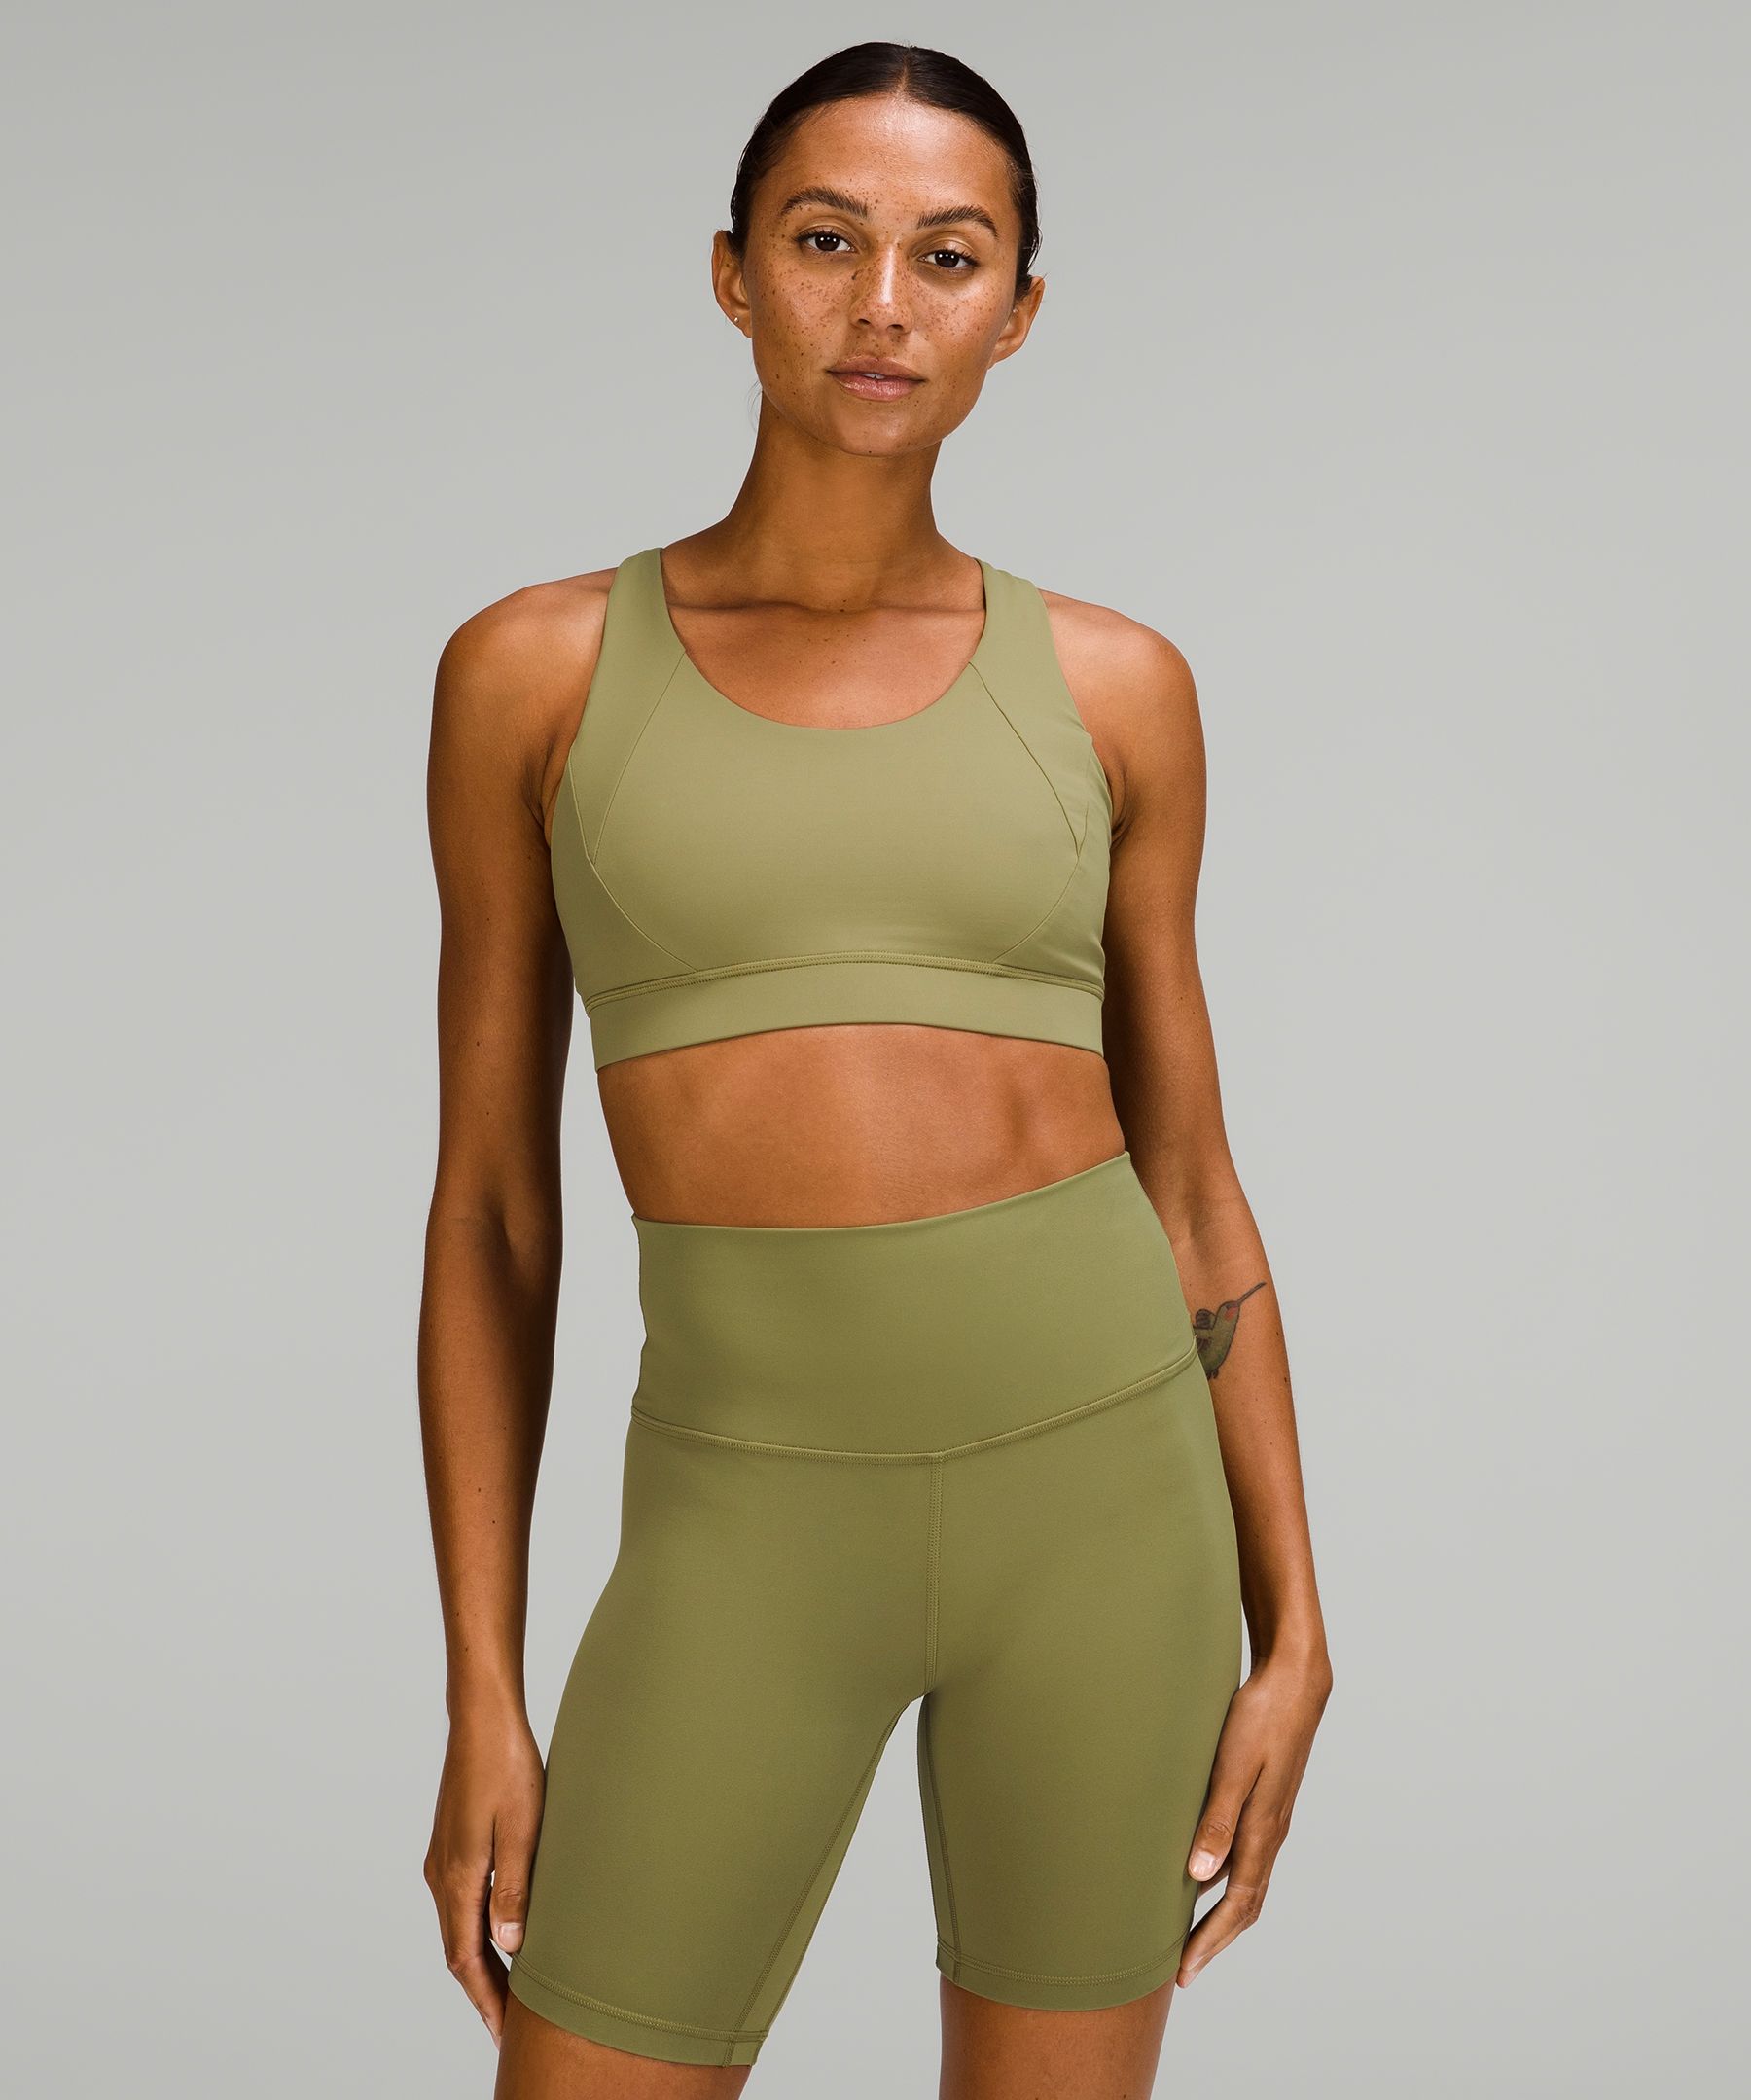 Lululemon Free To Be Elevated Bra Light Support, Dd/ddd(e) Cup In Bronze Green